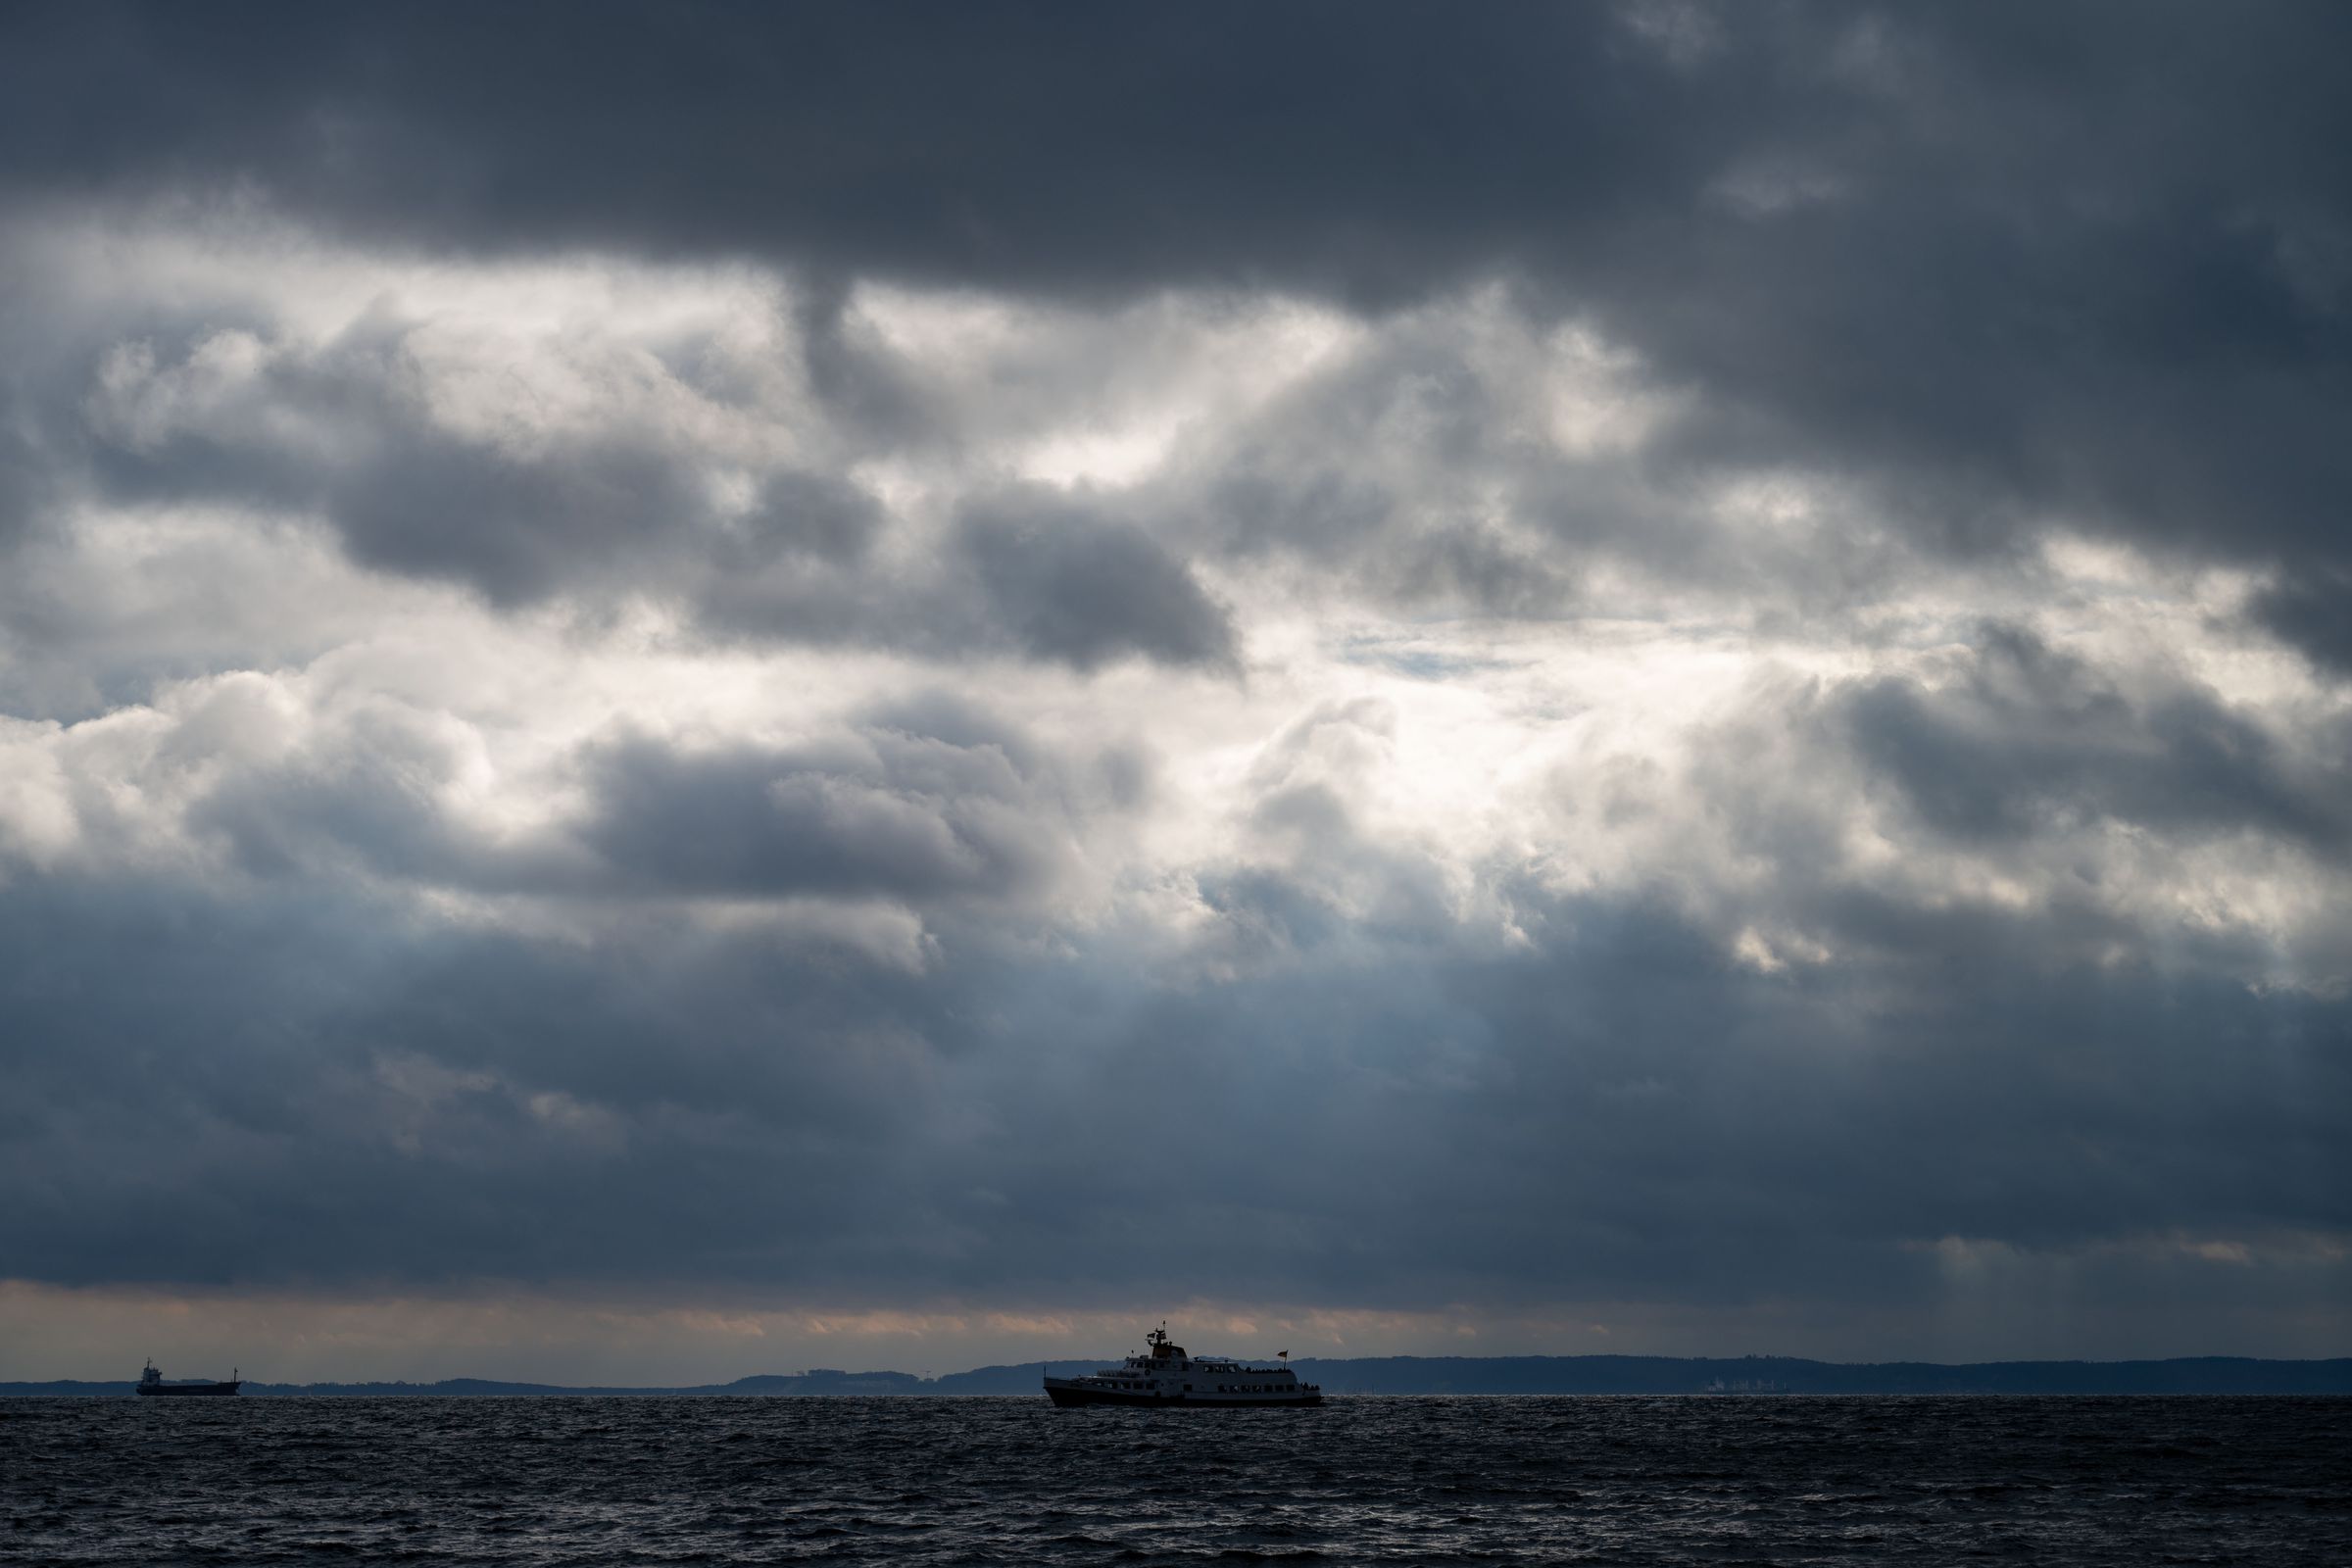 A ship on the sea is seen in the center of the photo. Above it, rays of sunlight pierce through gaps in thick clouds.